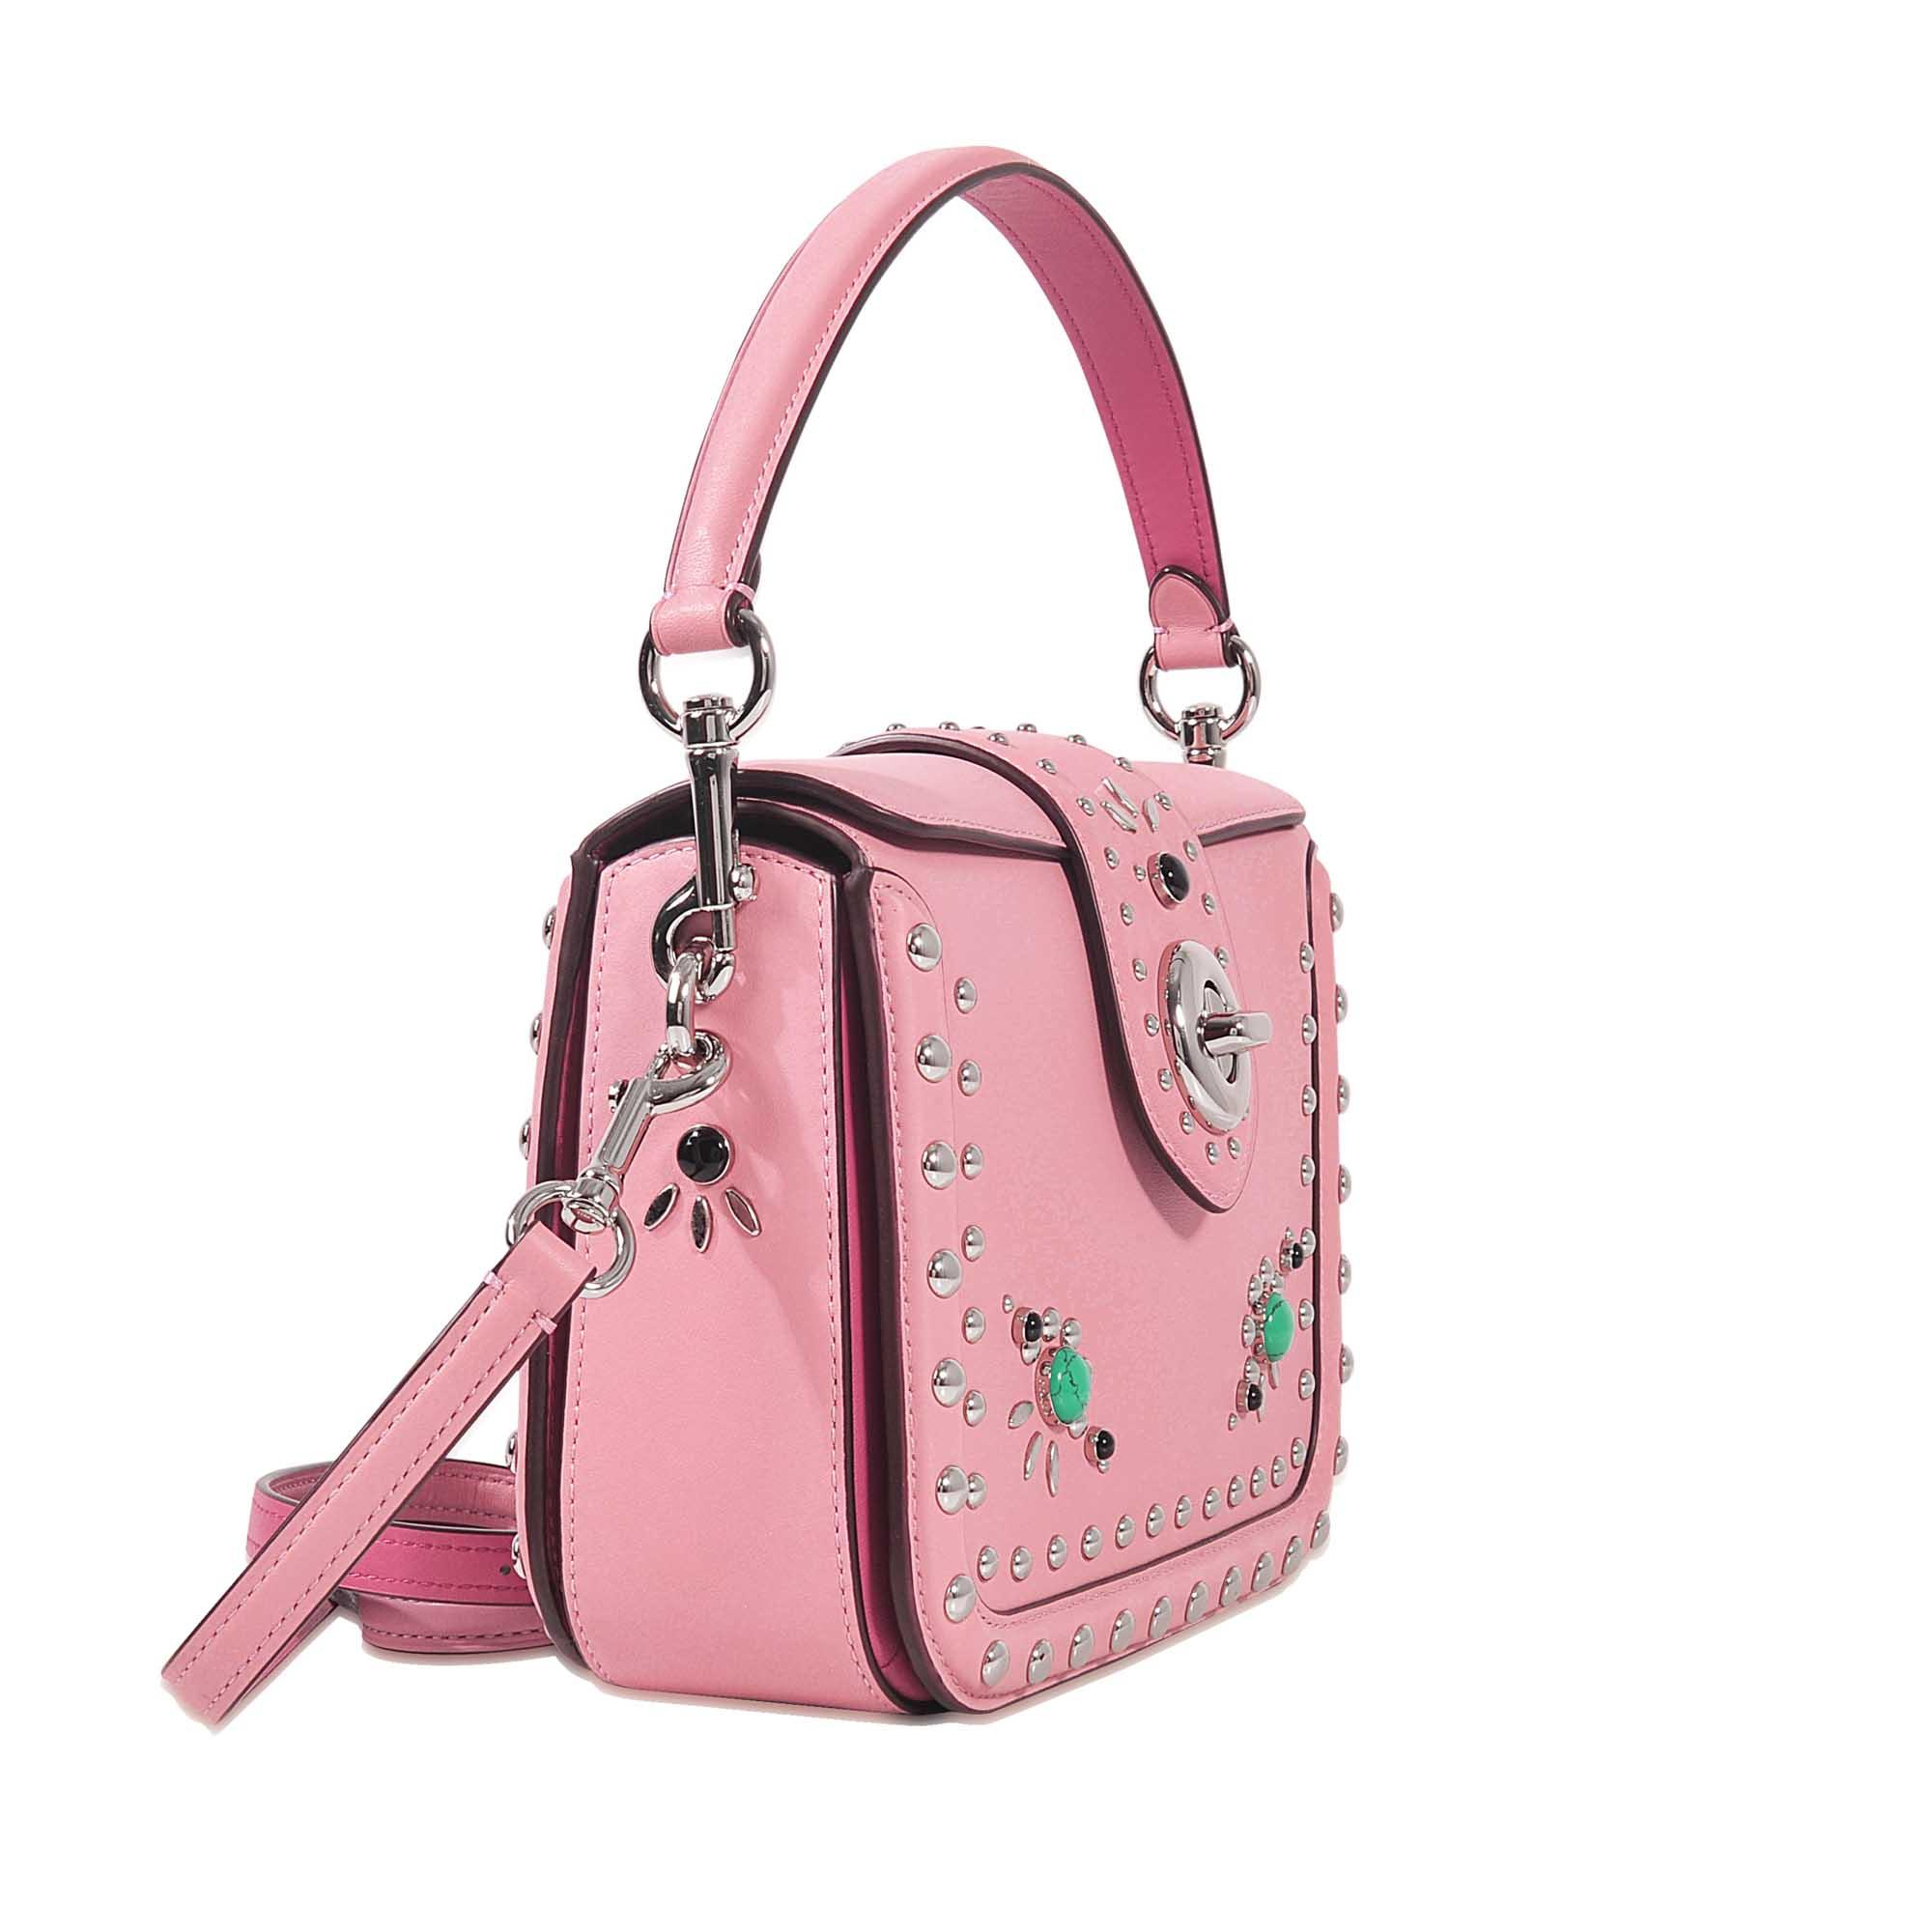 COACH Page Crossbody Bag in Pink - Lyst